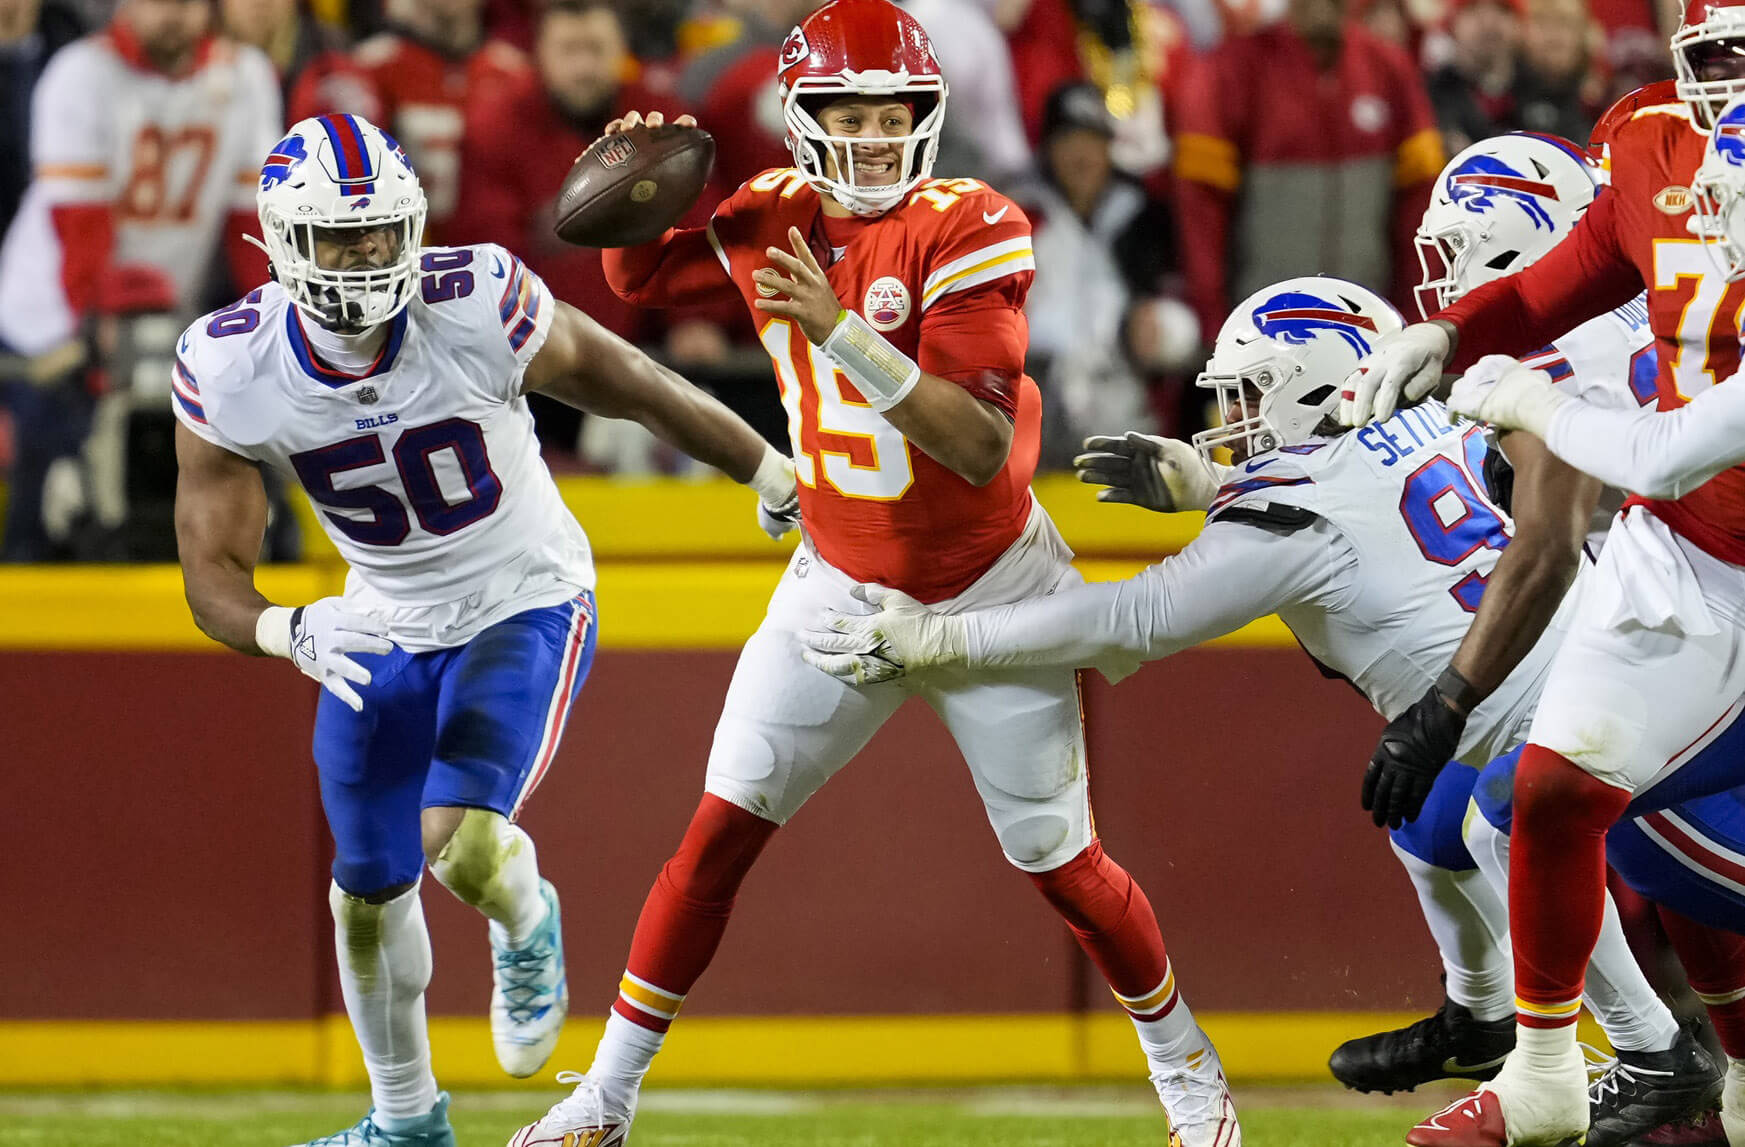 Kansas City Chiefs quarterback Patrick Mahomes (15) throws a pass against Buffalo Bills defensive end Greg Rousseau (50) and defensive tackle Tim Settle (99) during the second half at GEHA Field at Arrowhead Stadium.